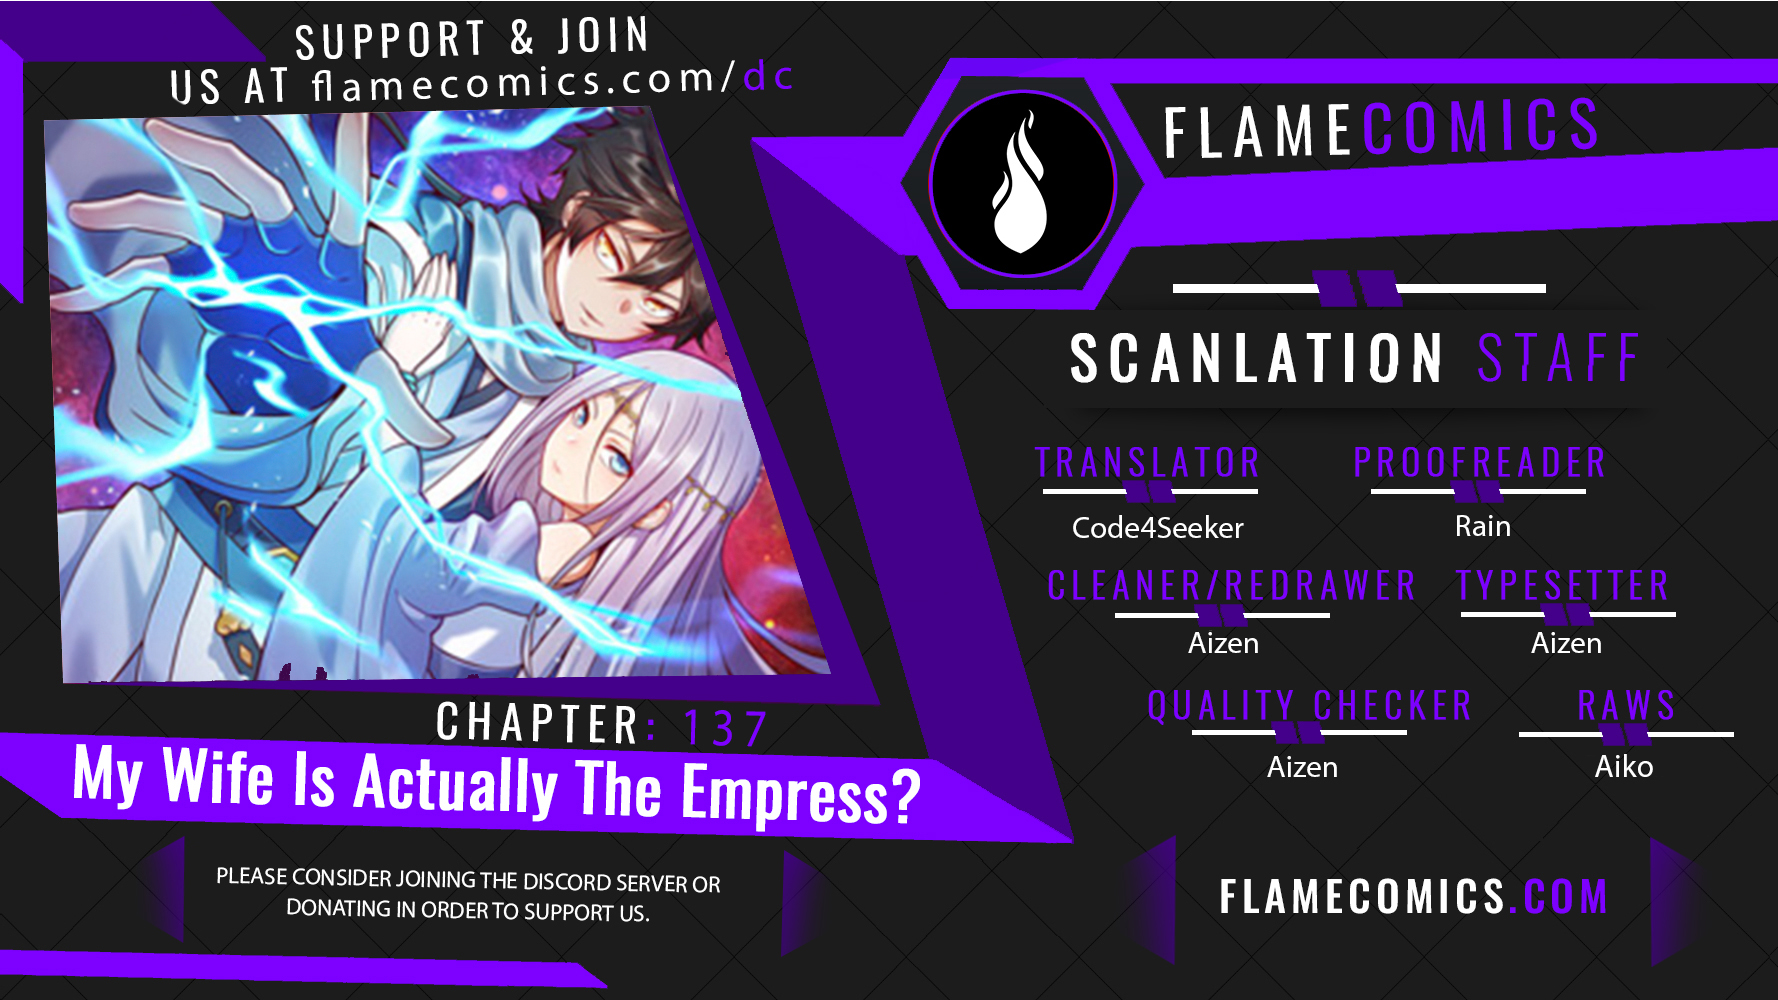 My Wife Is Actually The Empress? - Chapter 31075 - Image 1